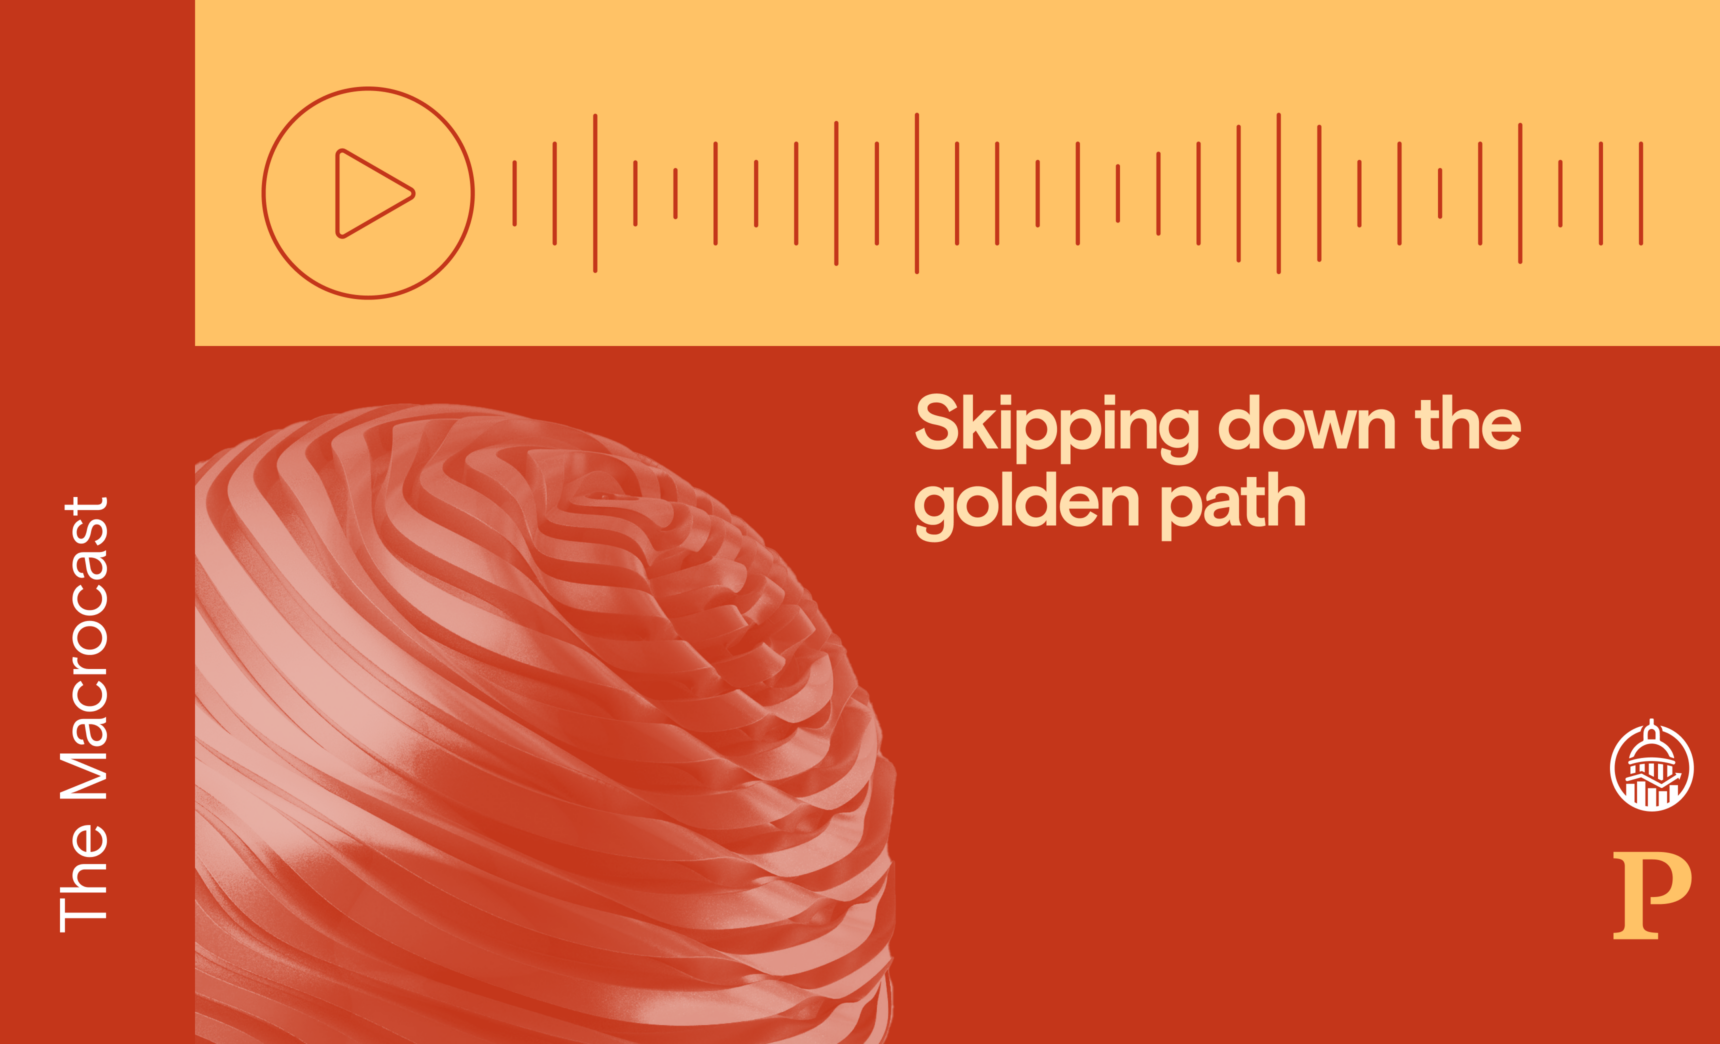 Macrocast: Skipping down the golden path